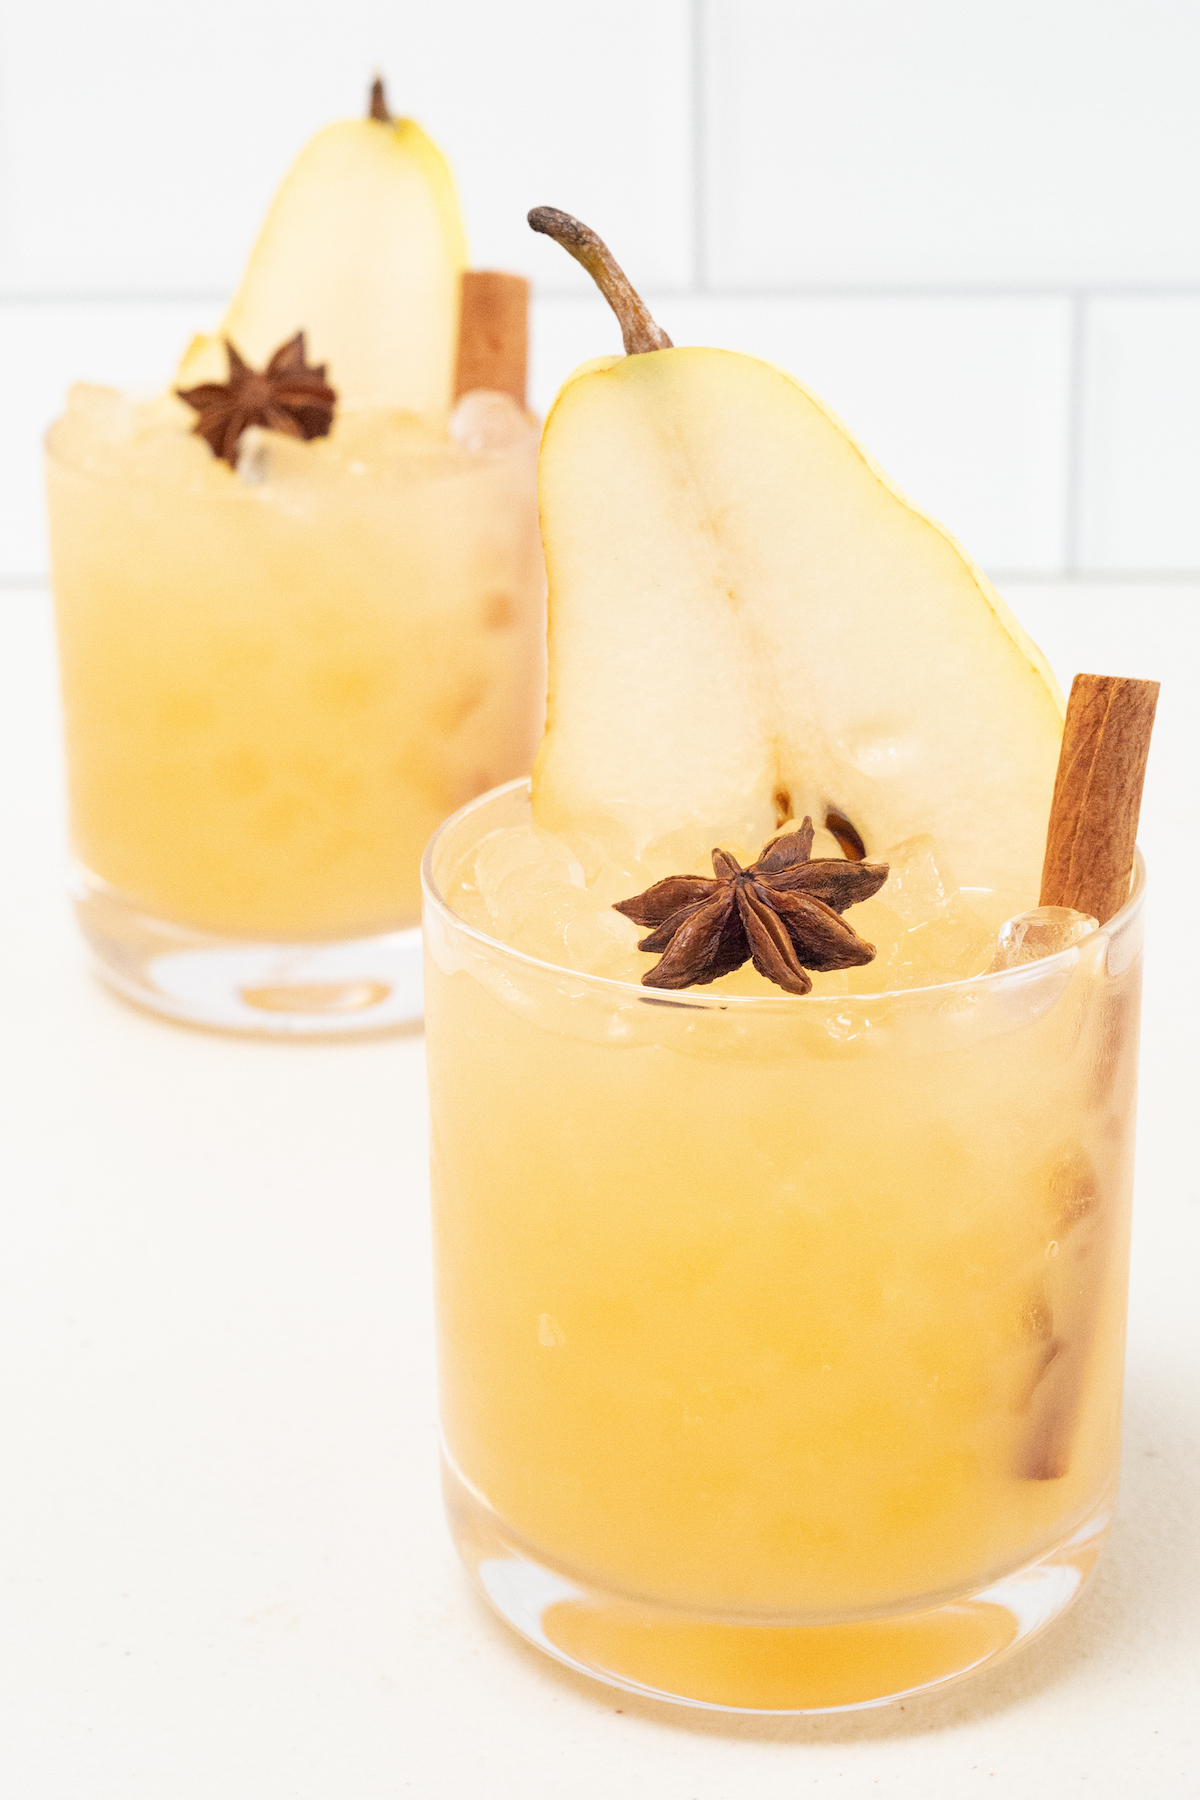 Two lowball glasses on a white background. They are filled with a yellow Thanksgiving cocktail that's garnished with a pear slice, star anise, and a cinnamon stick.